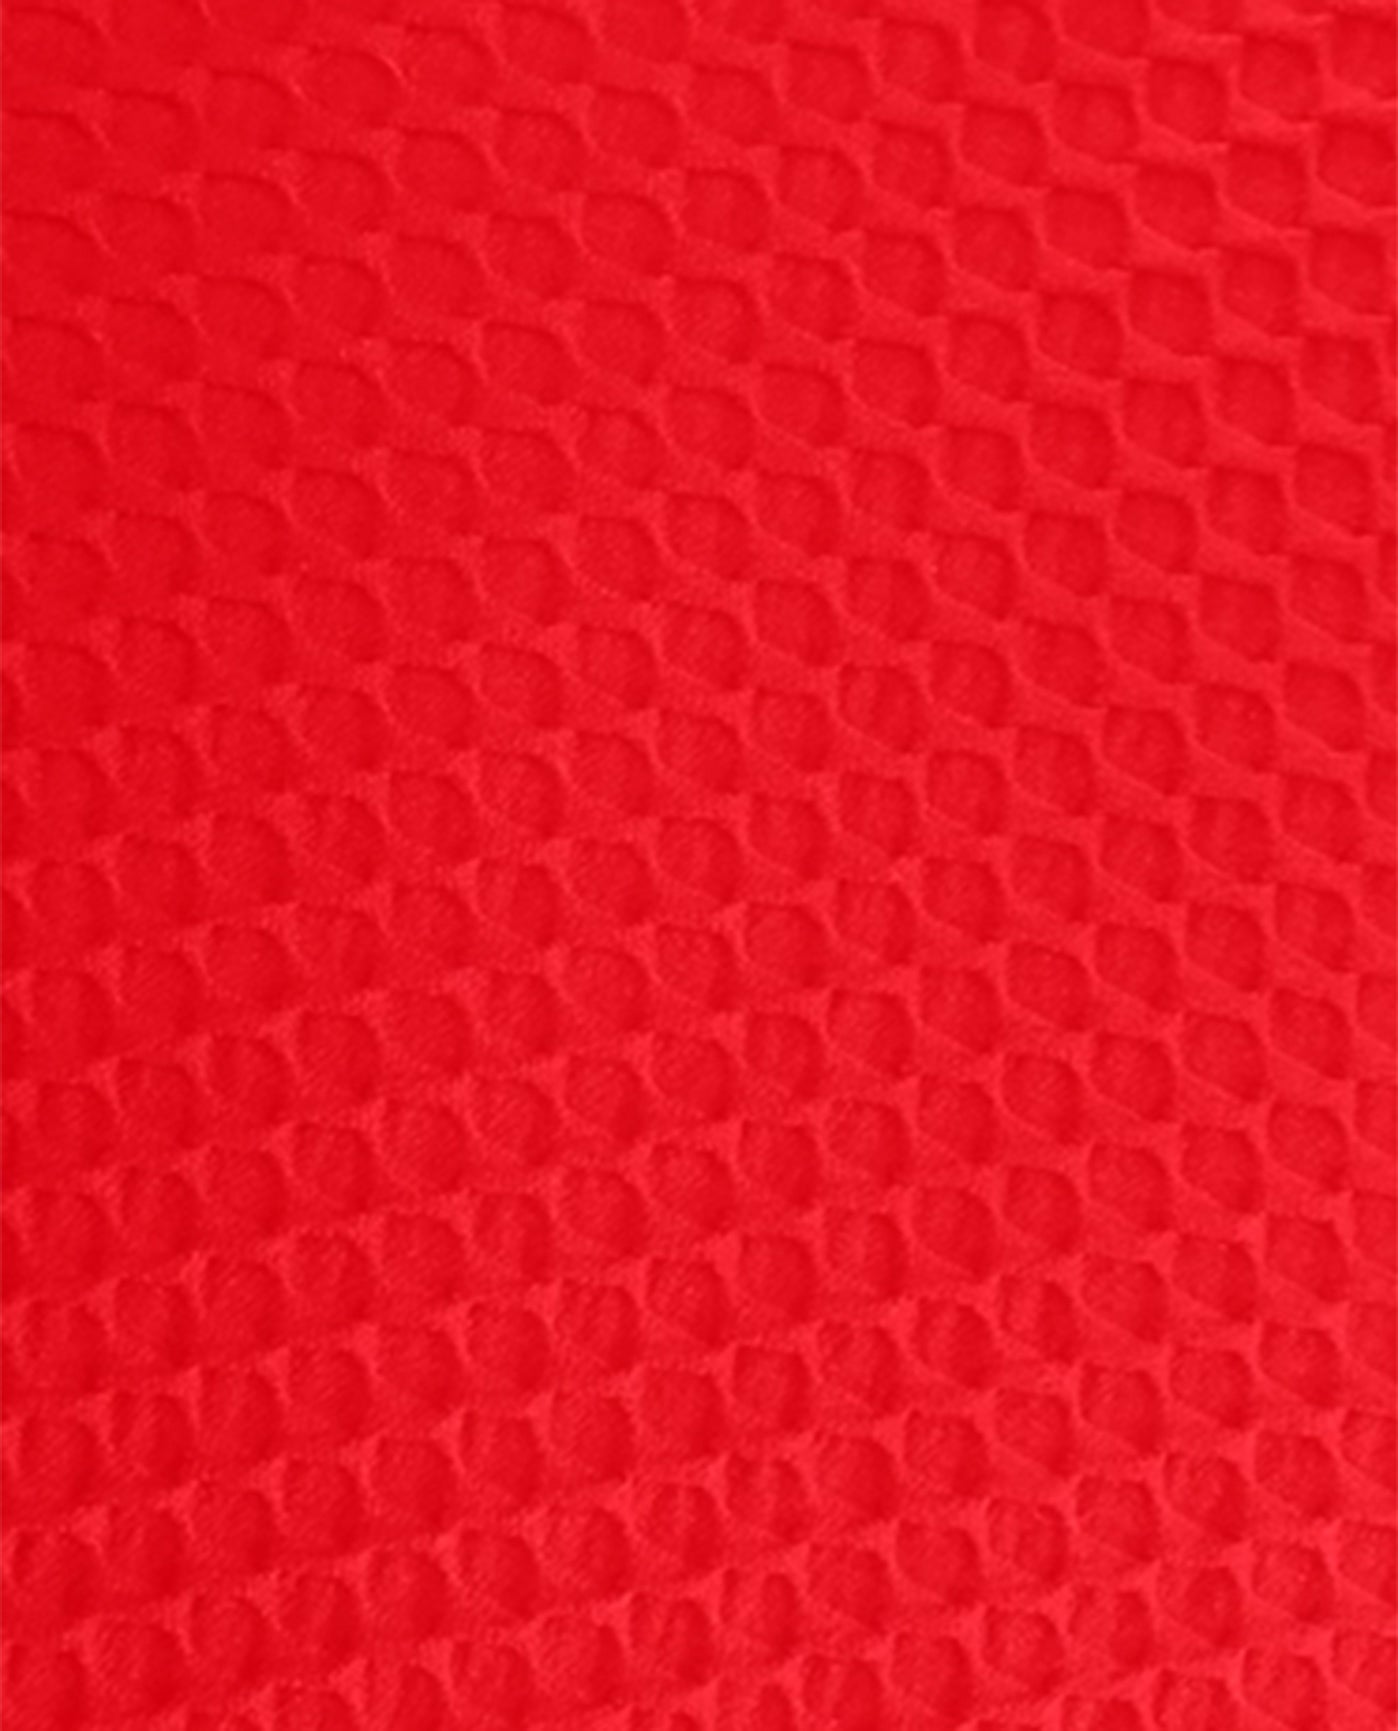 FABRIC SWATCH VIEW OF CHLORINE RESISTANT AQUAMORE COLOR BLOCK TEXTURED CHEVRON V-NECK ONE PIECE SWIMSUIT | 616 AQT TEXTURED SCARLET